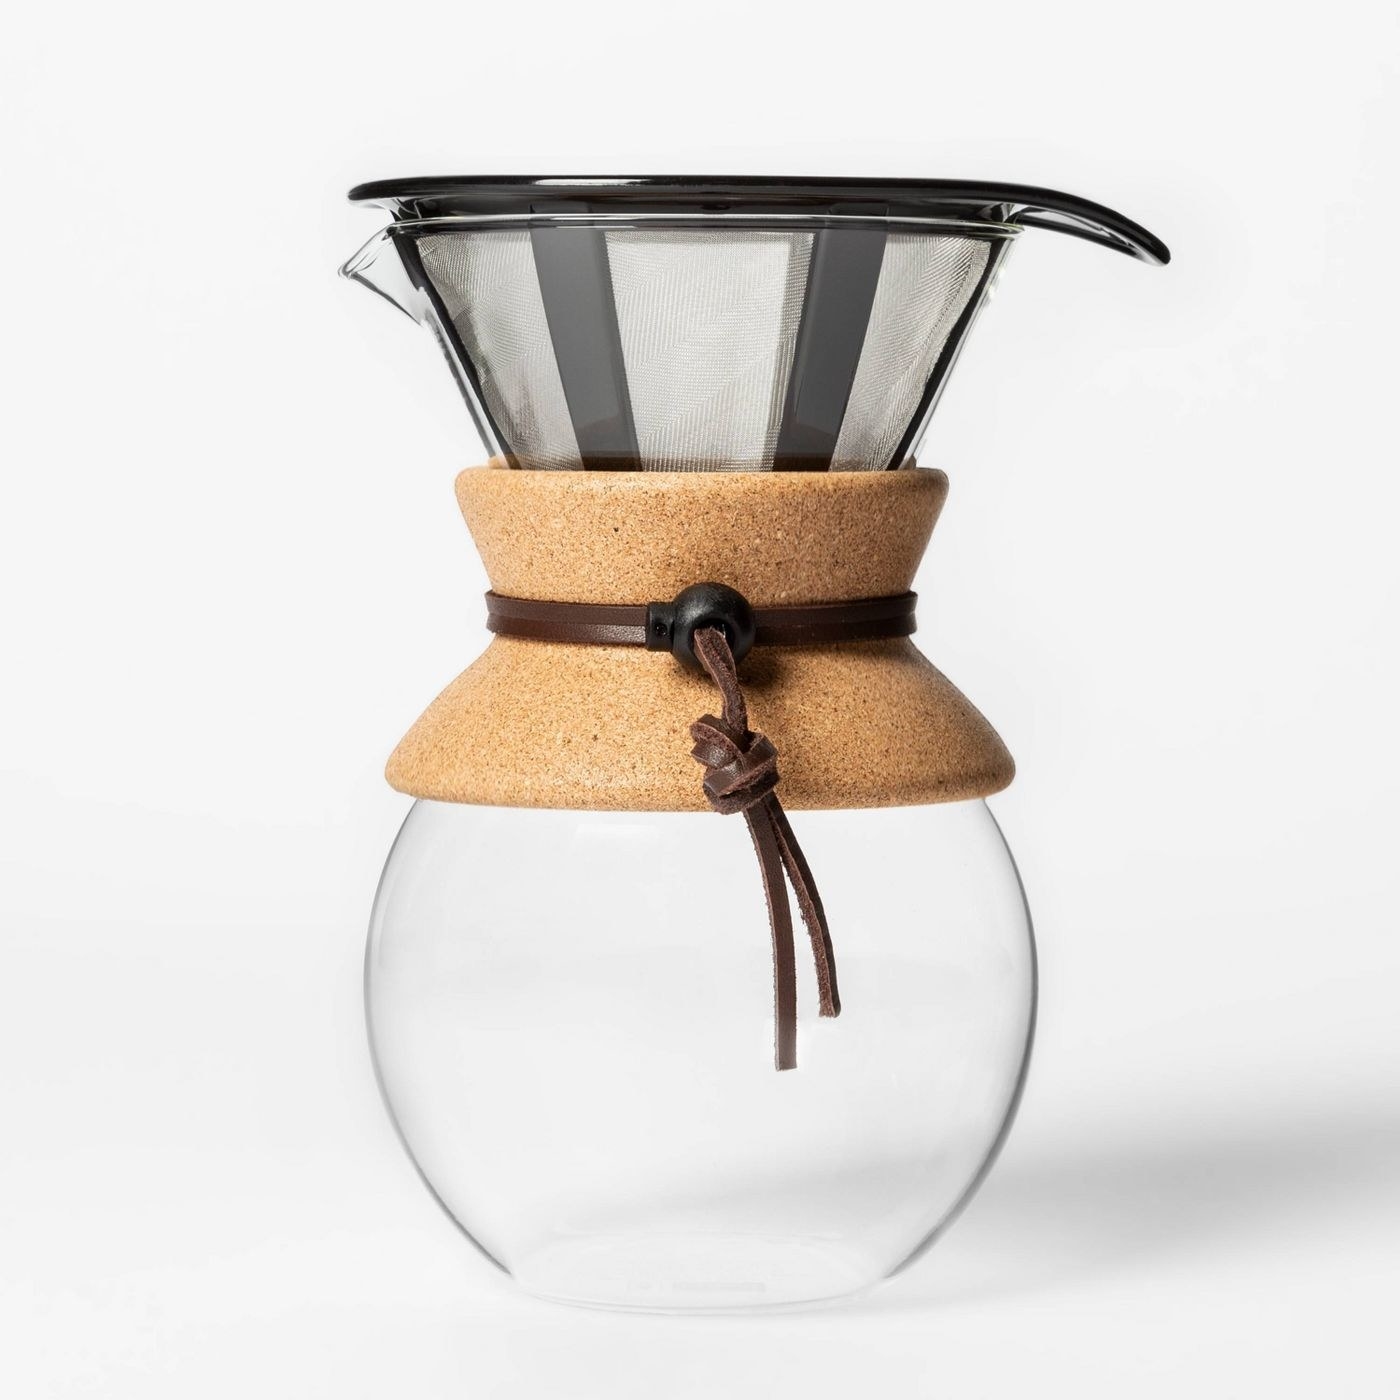 The glass pour-over coffee maker